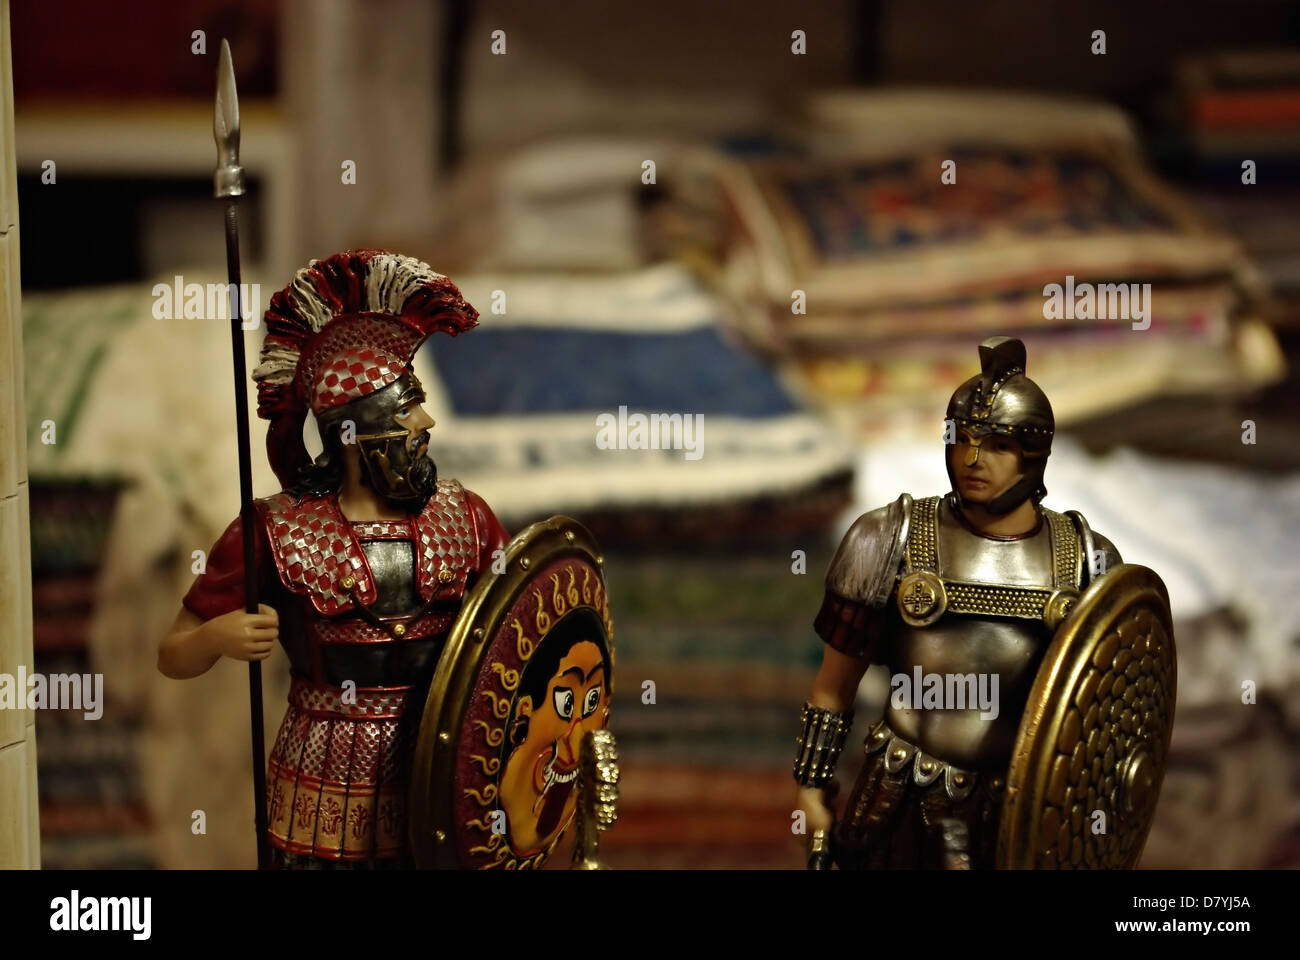 Shelf in antiquities shop with metal medieval crusades knight soldiers. Stock Photo